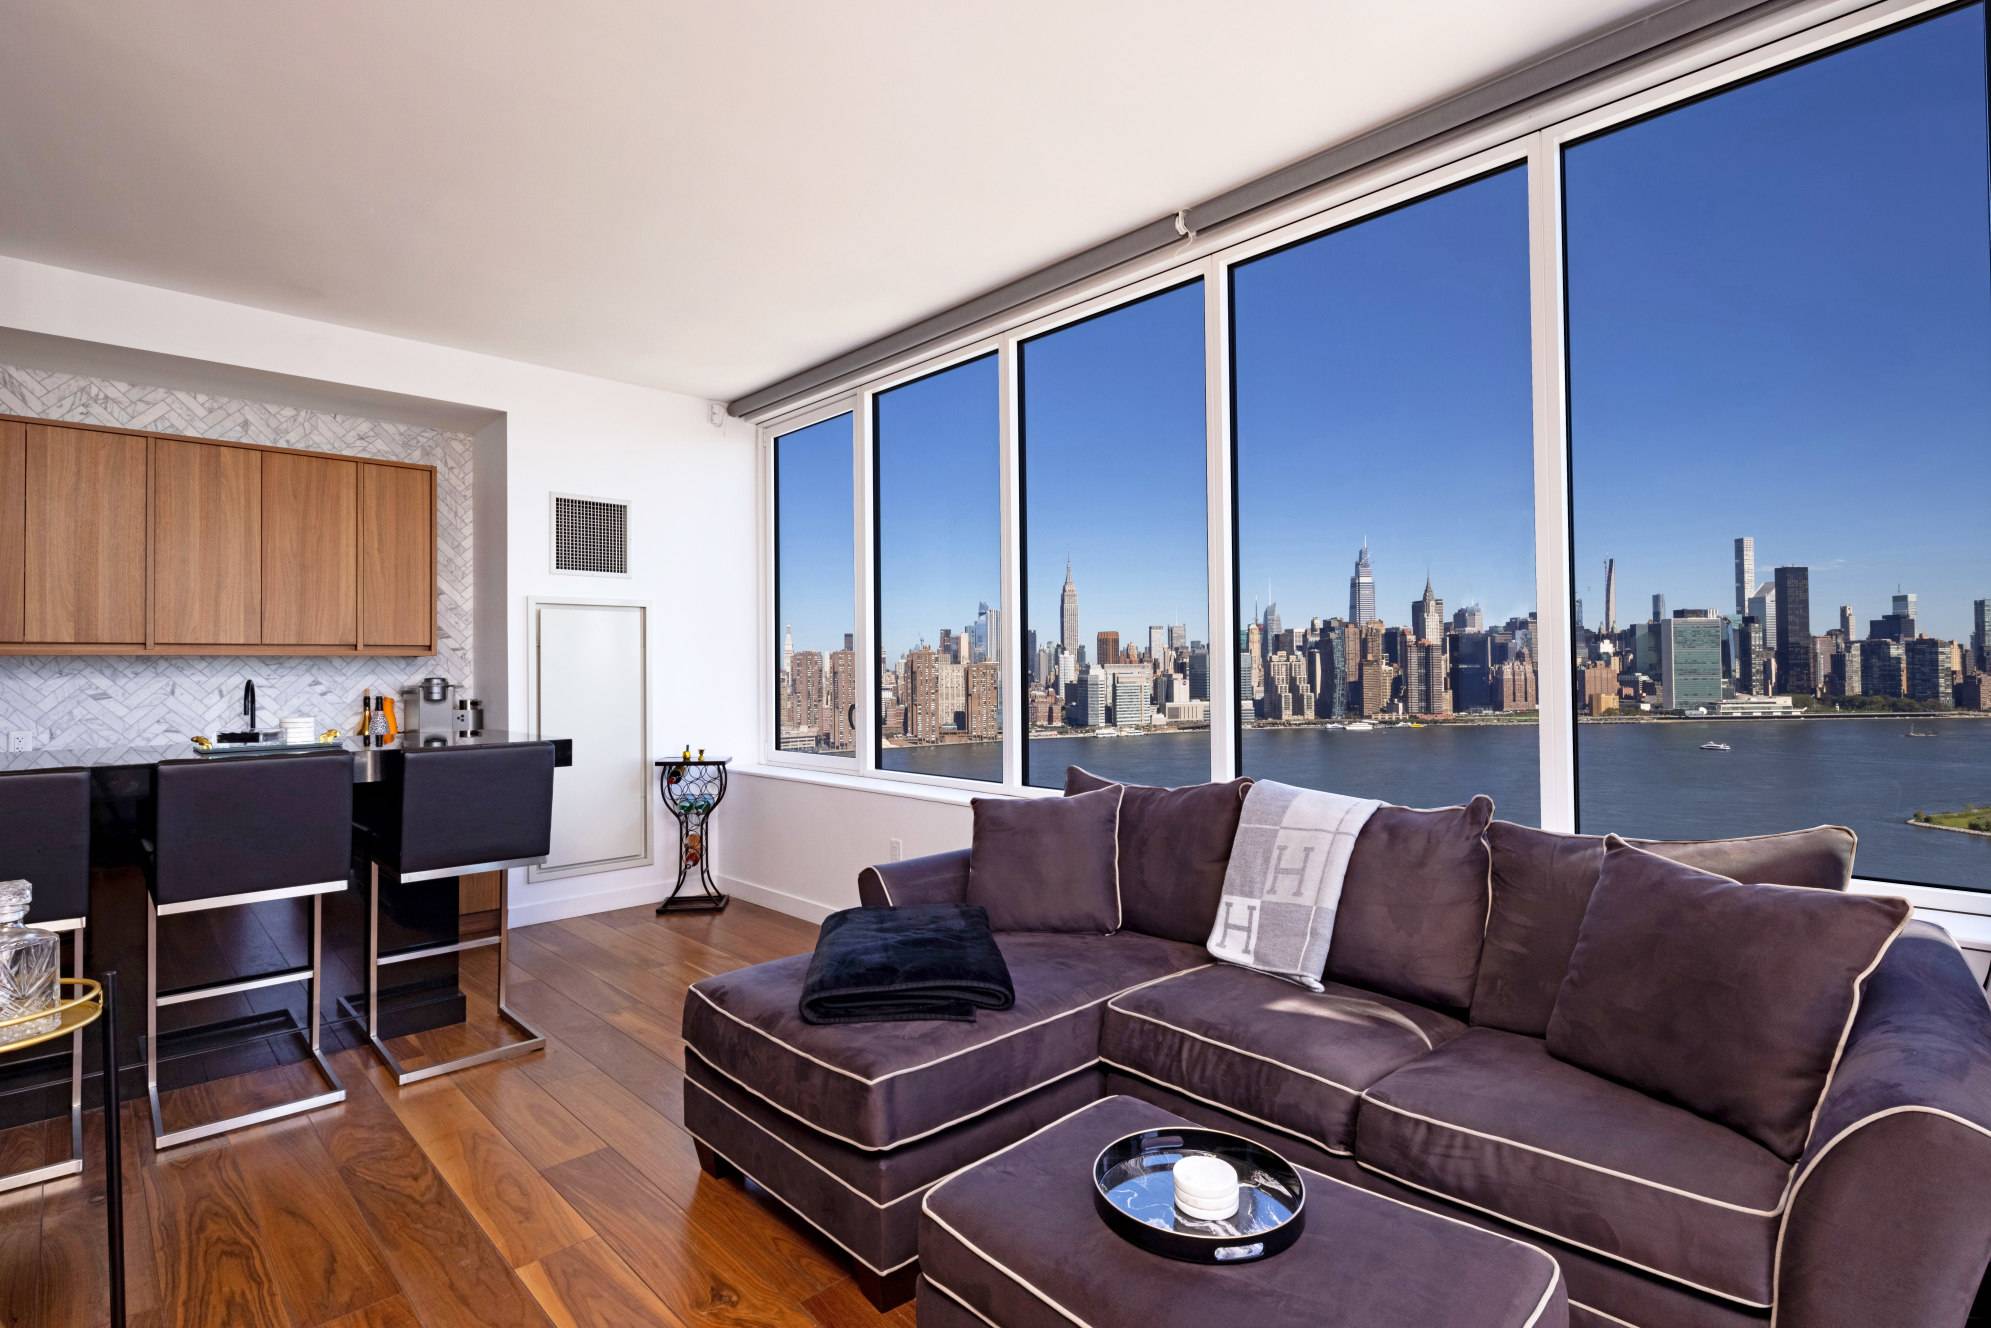 Awe inspiring views in the extra large 1 bedroom on the Brooklyn waterfront in an amenity rich building suited for your luxury lifestyle.